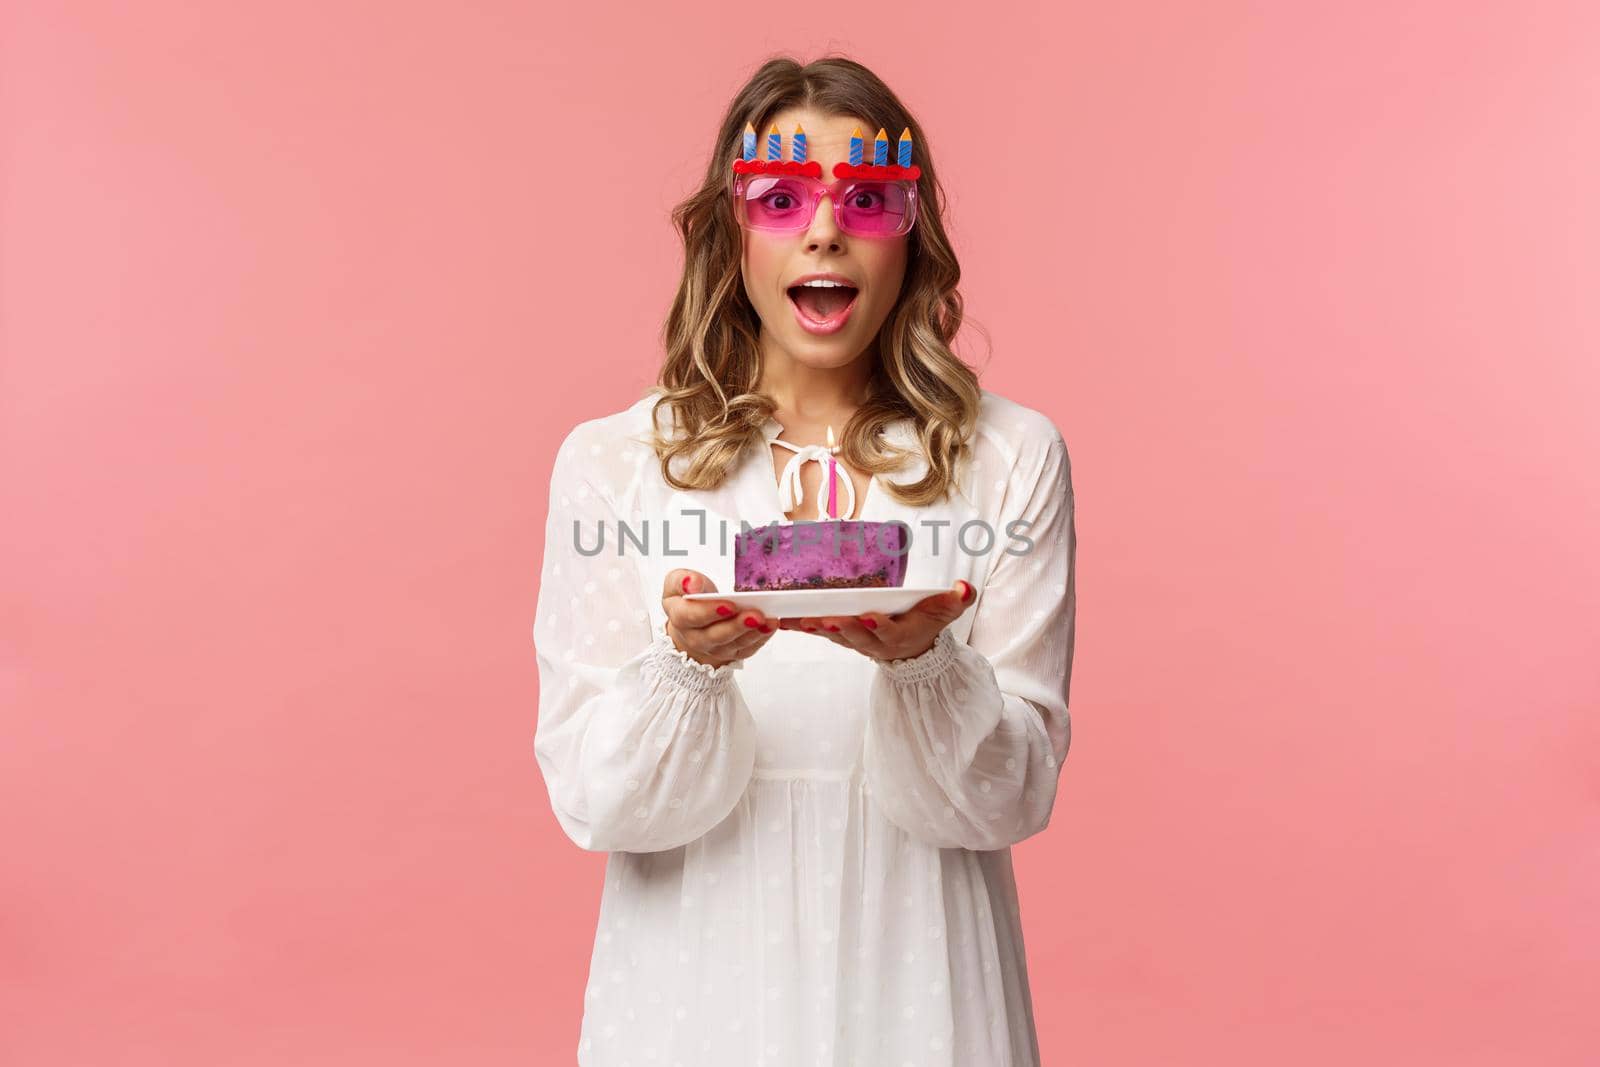 Holidays, spring and party concept. Excited, happy attractive blond woman in white dress, wearing funny b-day glasses, holding birthday cake with lit candle, making wish smiling camera.